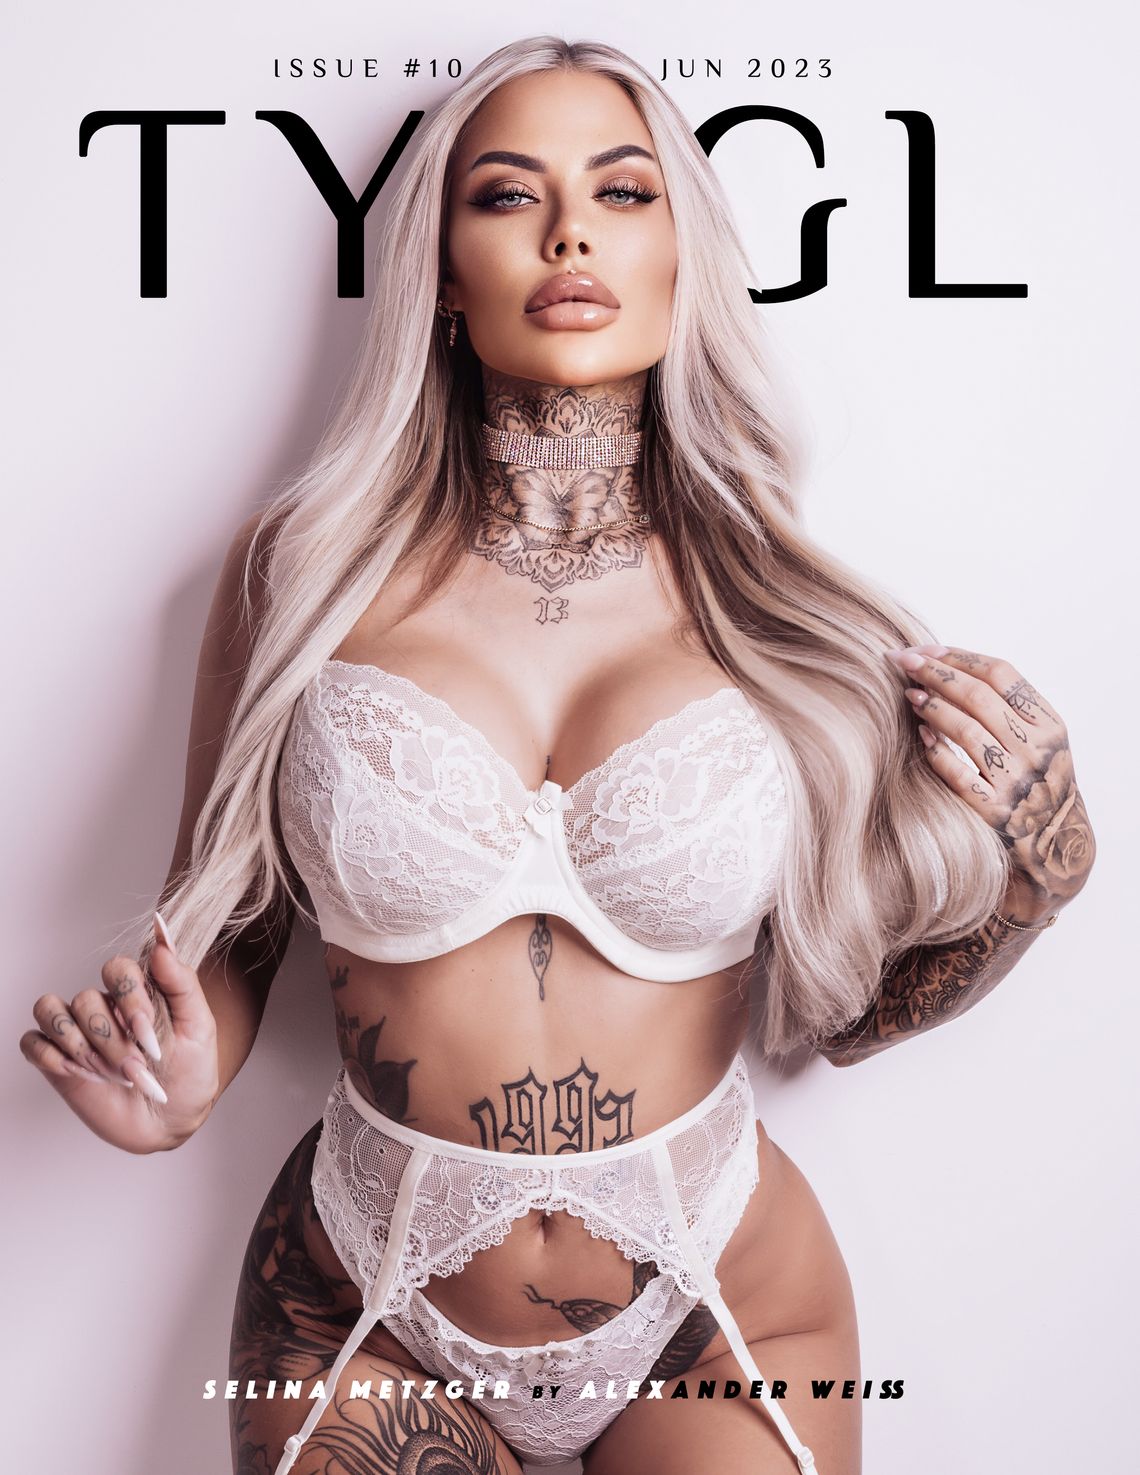 TYNGL Magazine Issue 10 -  June 2023 Launched Worldwide